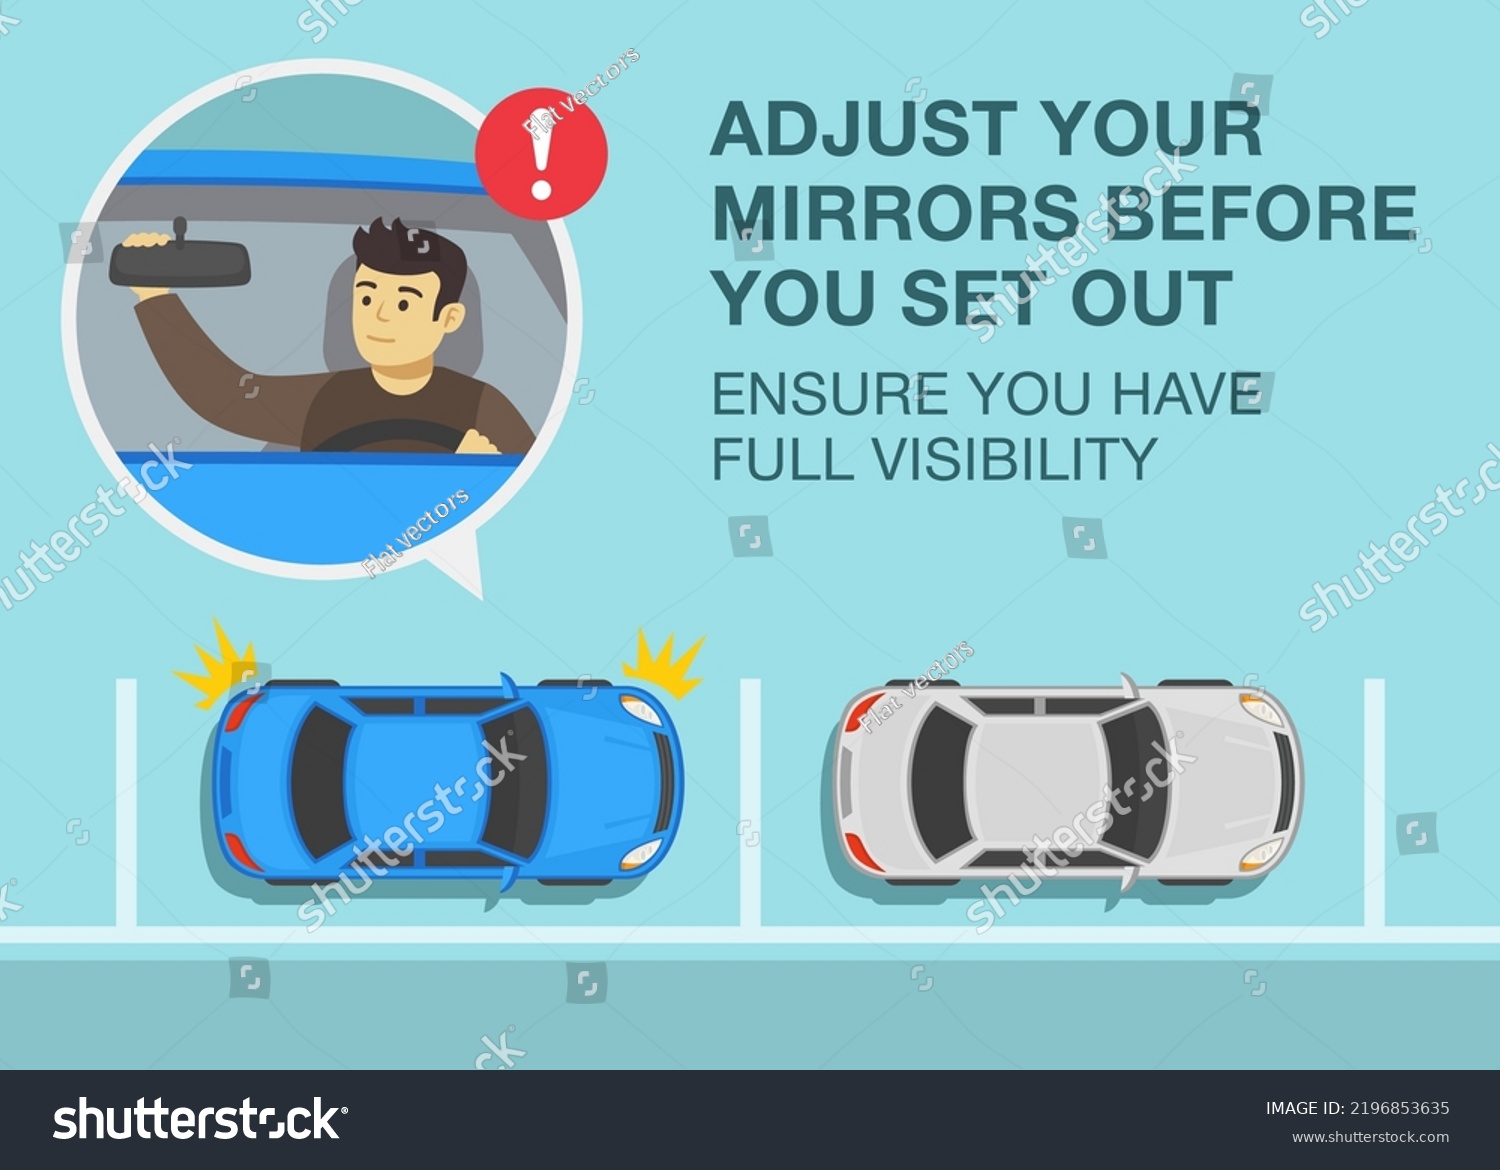 SVG of Safe driving tips and traffic regulation rules. Adjust your mirrors before you set out, ensure you have full visibility. Male driver adjusting rear mirror in a car. Flat vector illustration template. svg